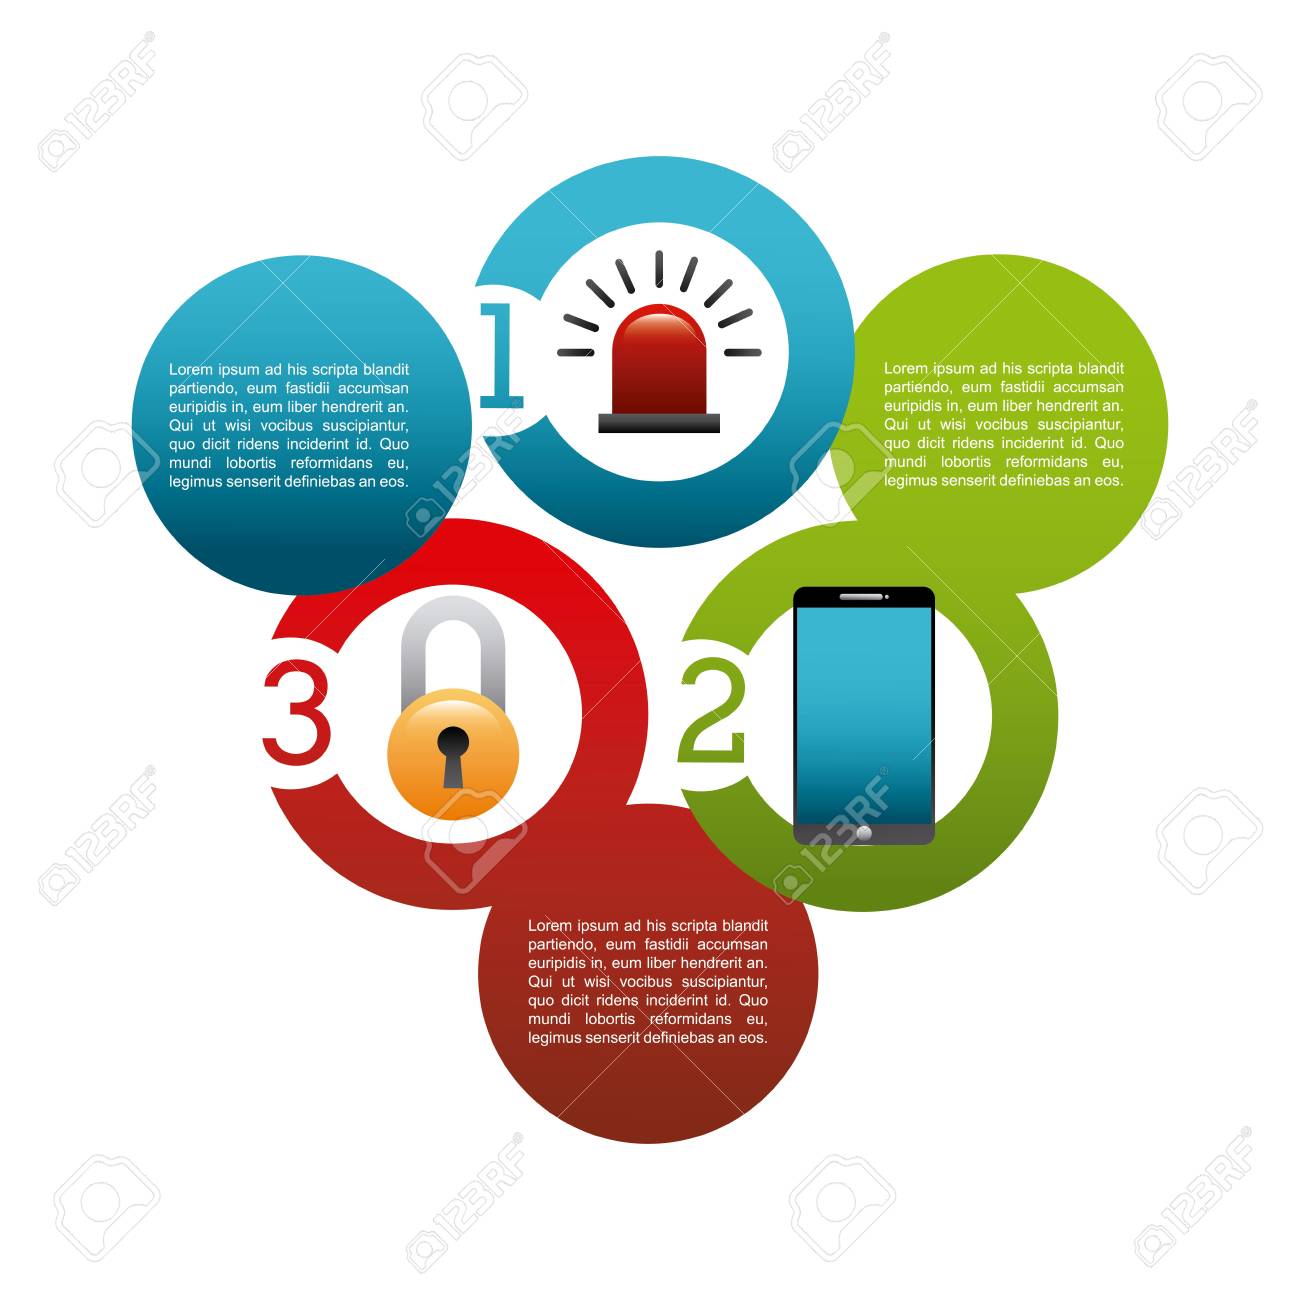 Web Security Clipart infographic